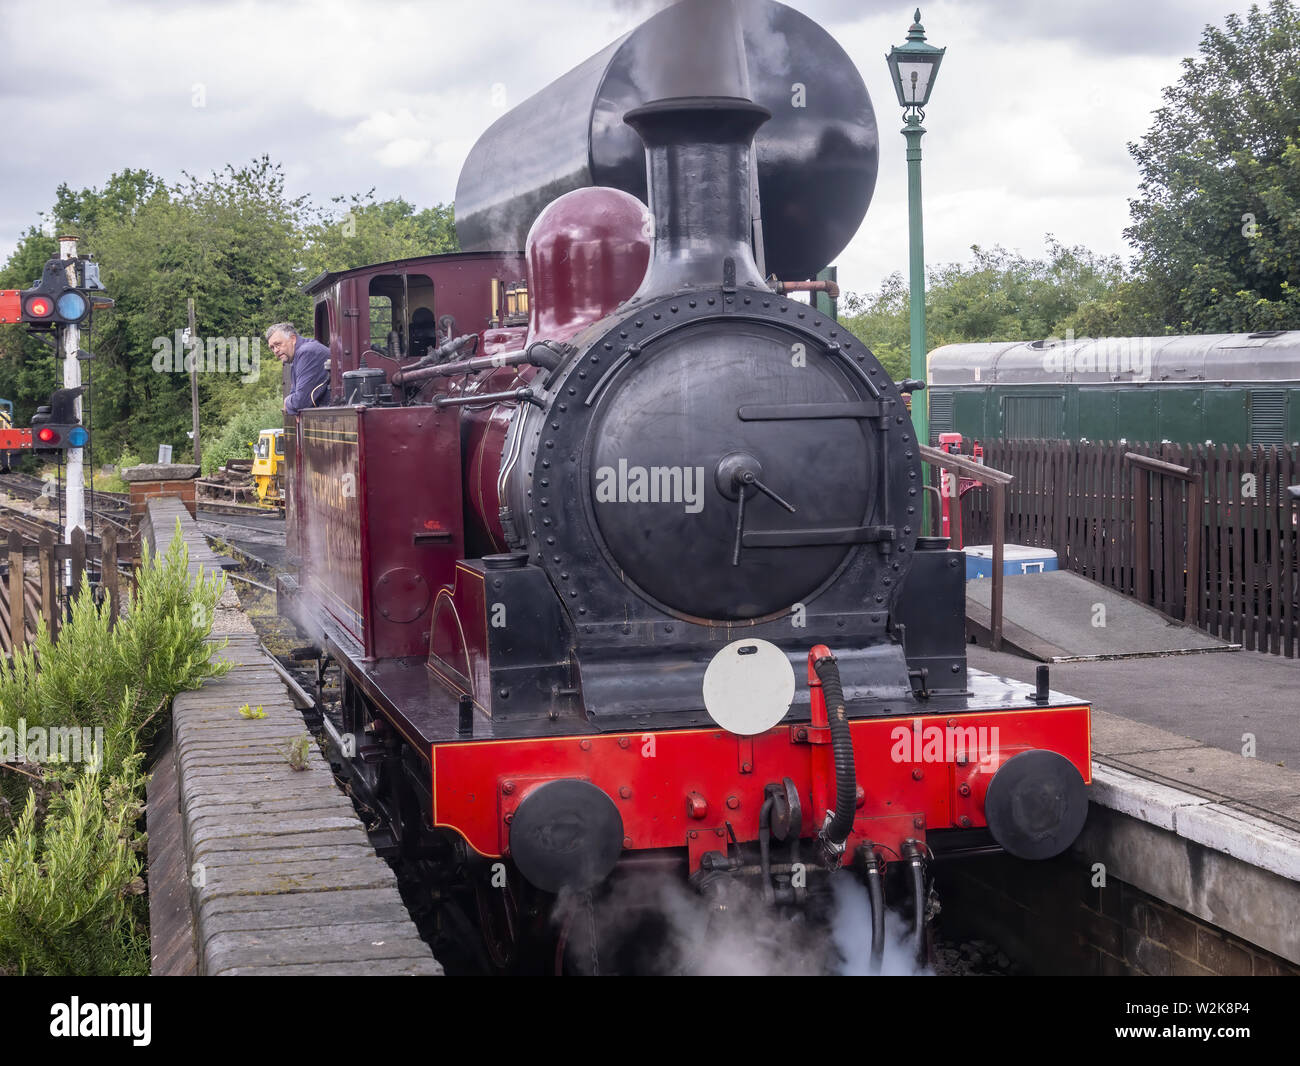 Metrpolitan railway no 1 class E 0-4-2 tank locomotive  at North Weald station on the Epping and Ongar railway Stock Photo